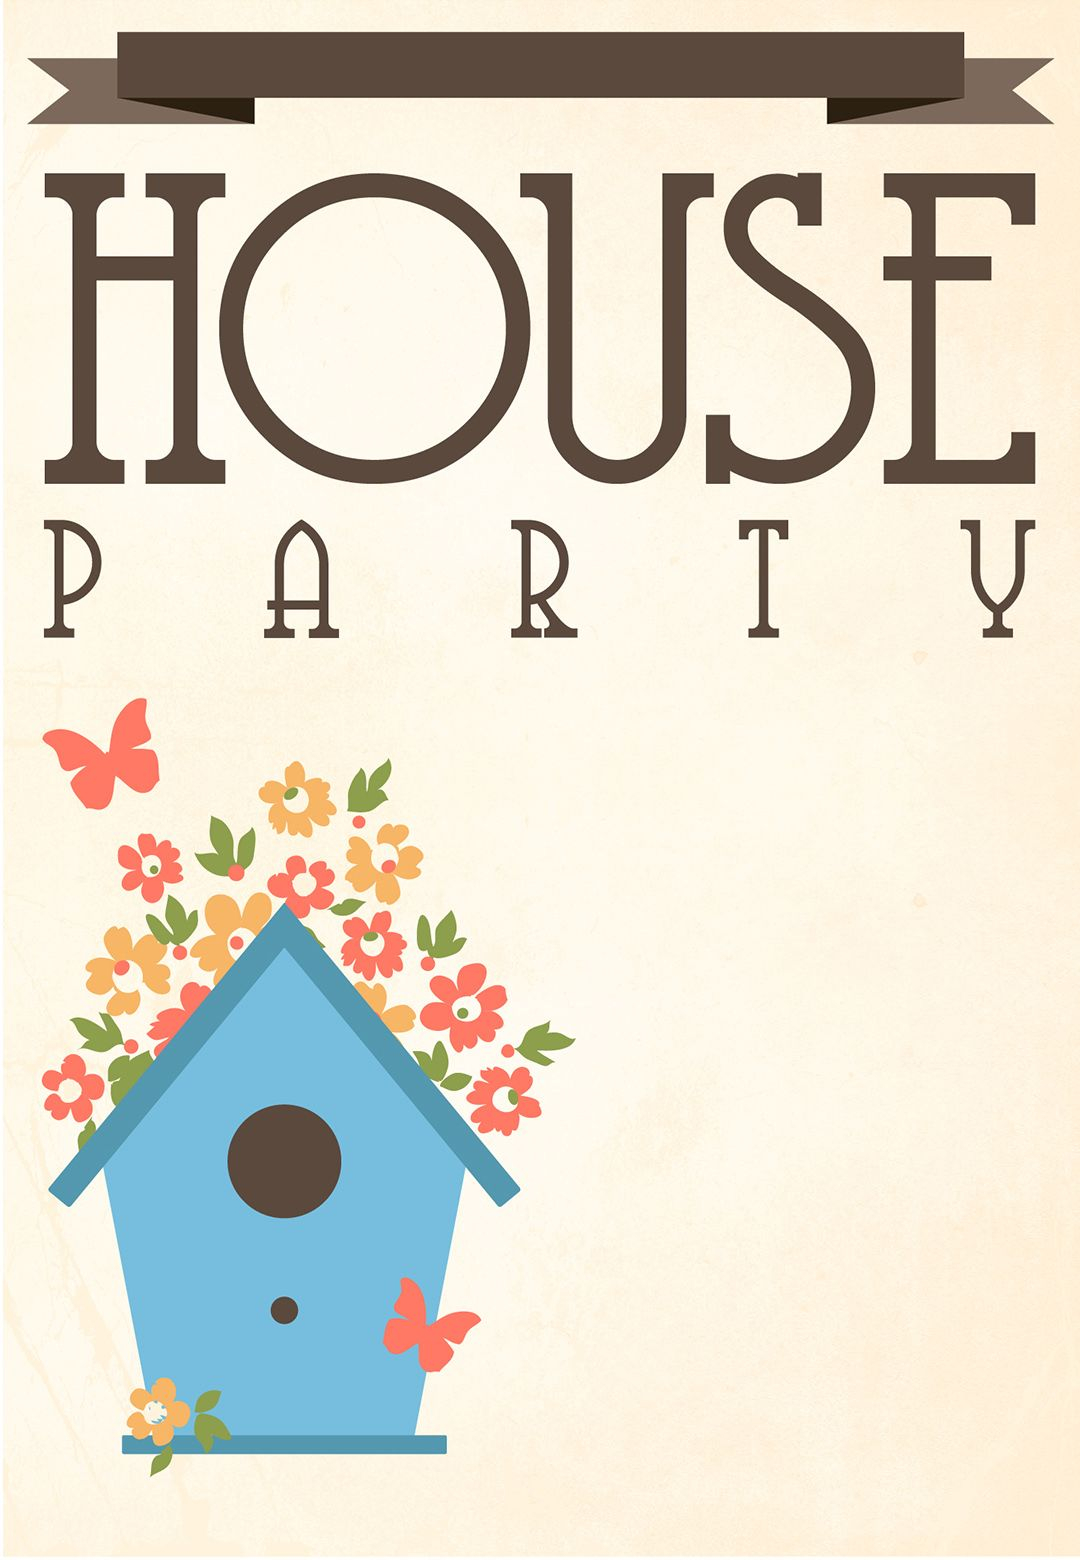 Free Printable House Party Invitation Fontsprintablestemplates throughout proportions 1080 X 1560